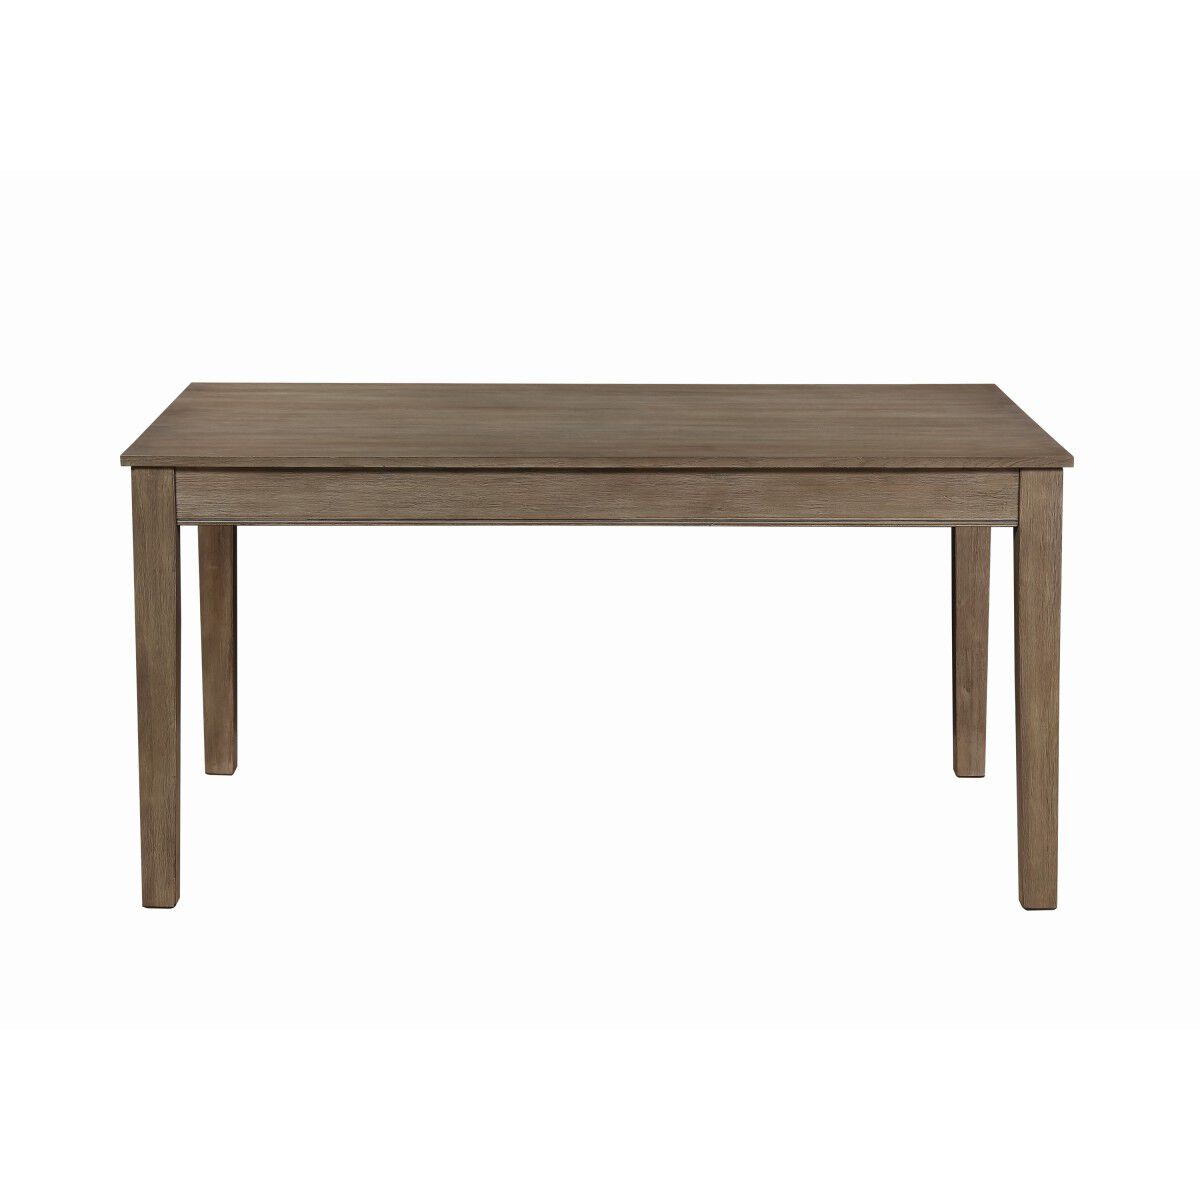 Transitional Style Wooden Dining Table with Two Drawers, Brown